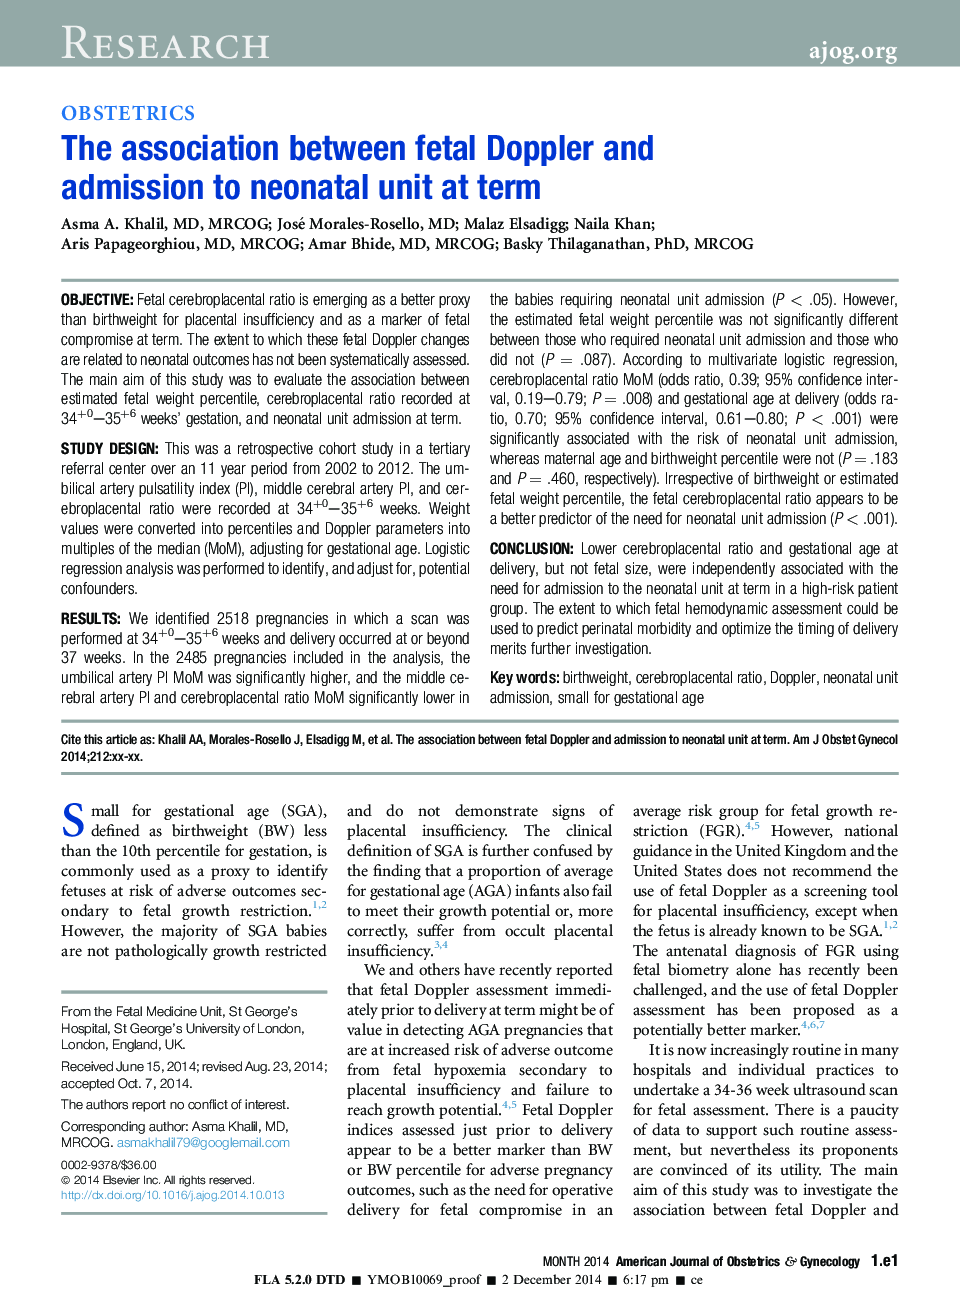 The association between fetal Doppler and admission to neonatal unit at term